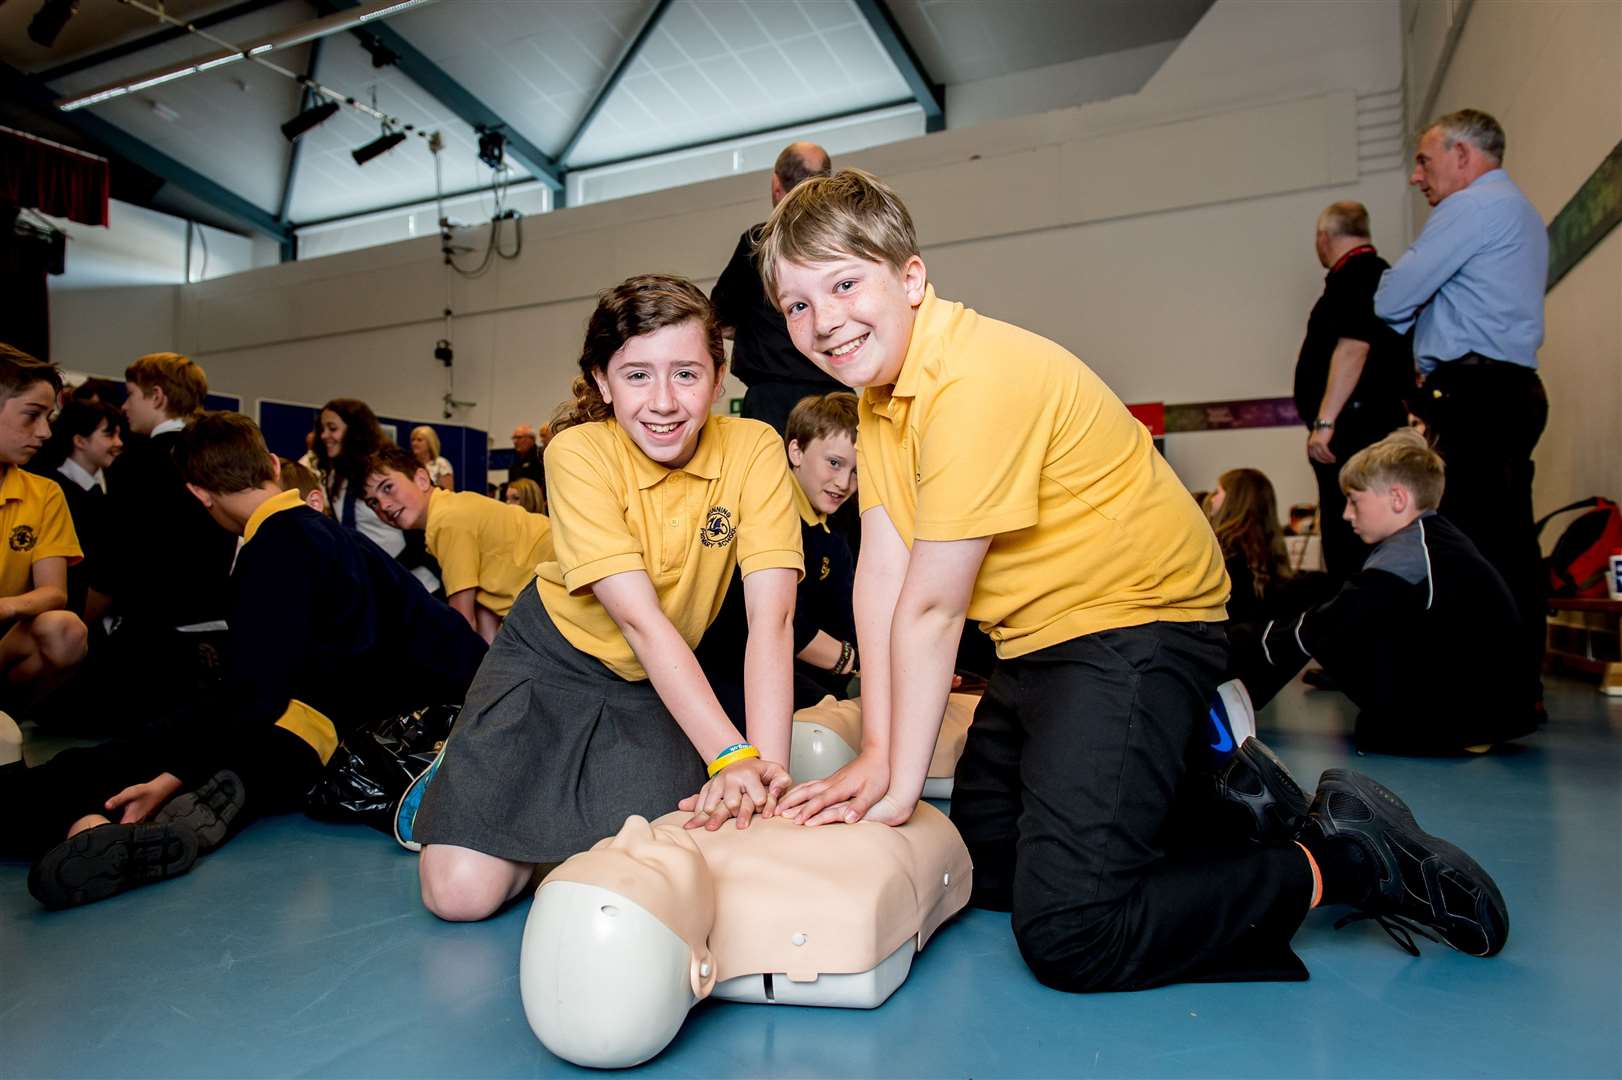 The Scottish Ambulance Service is working with schools to equip children with CPR skills. Picture: Fraser Band